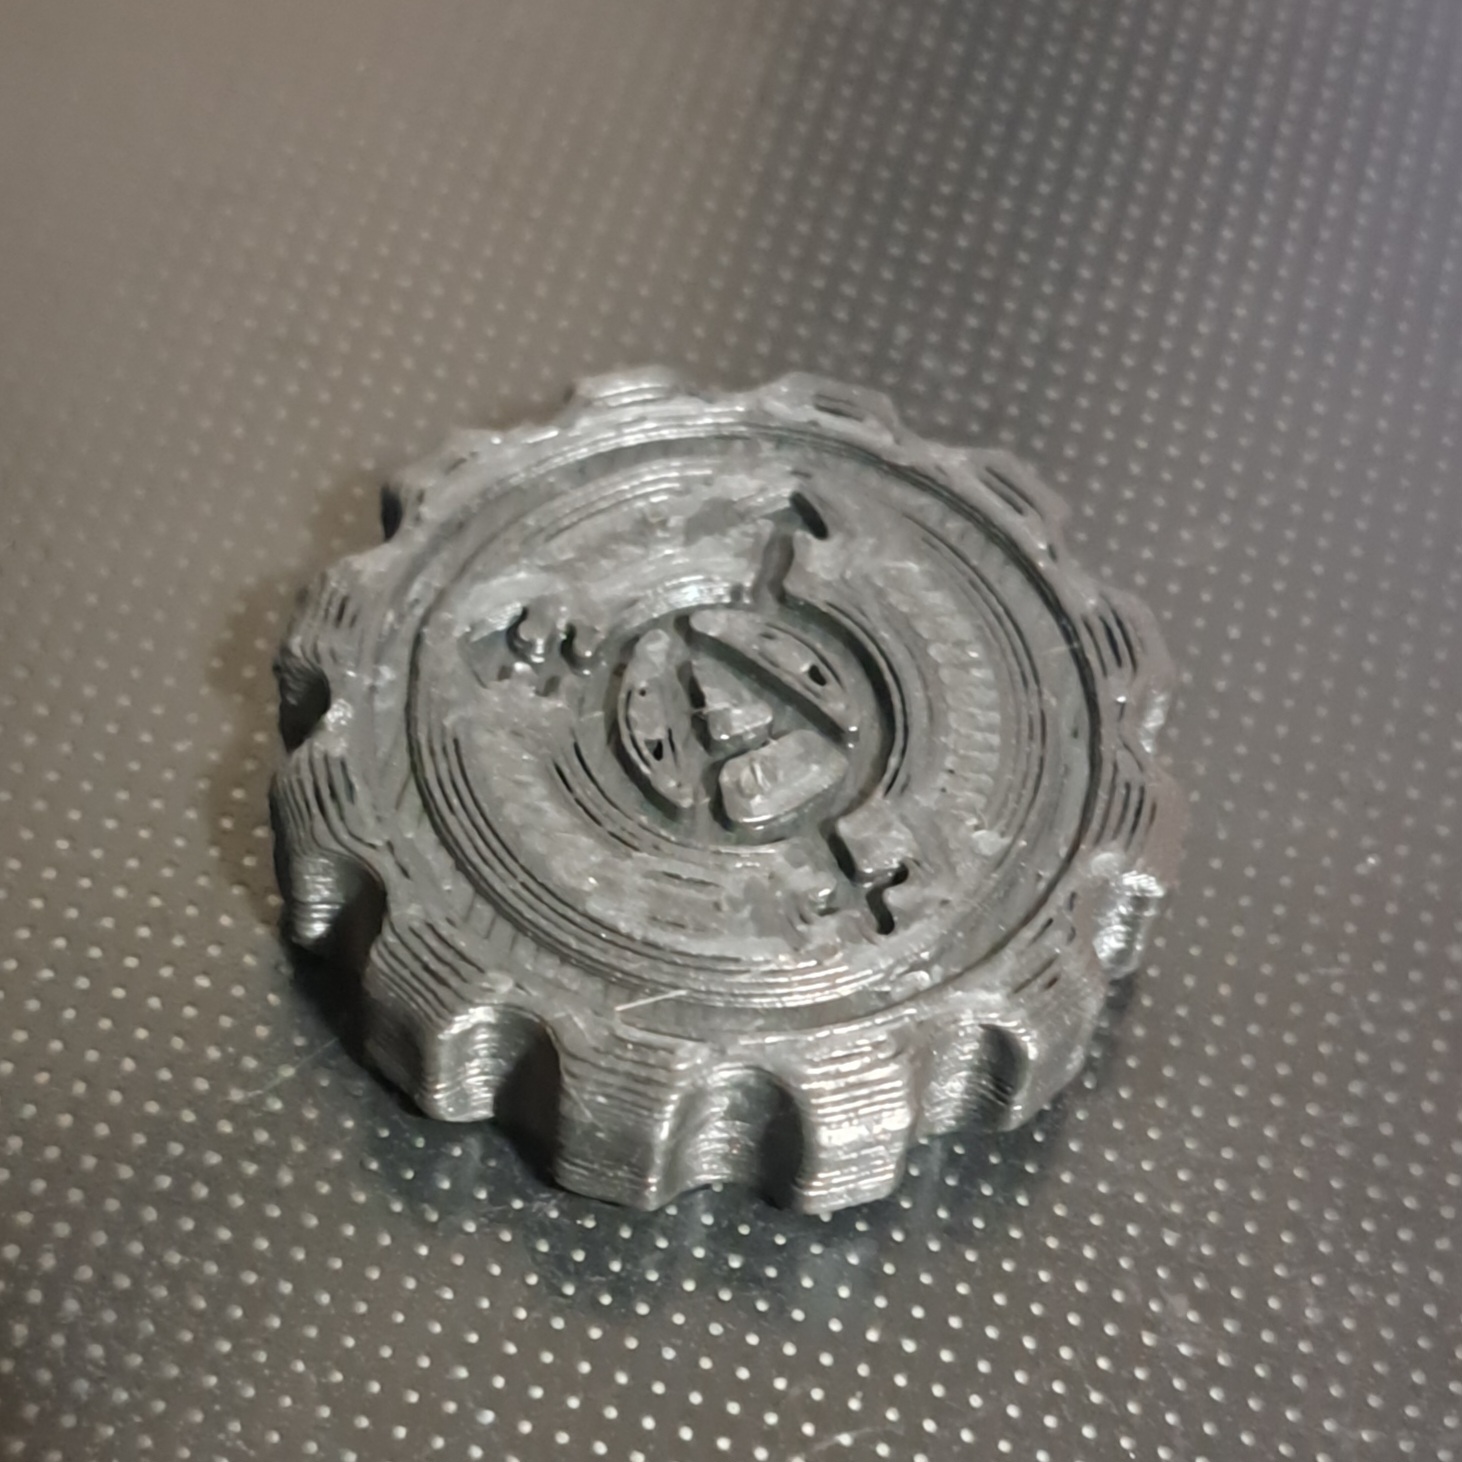 The top of Silver's maker coin, displaying a trans anarchy symbol recessed a millimeter into the material.